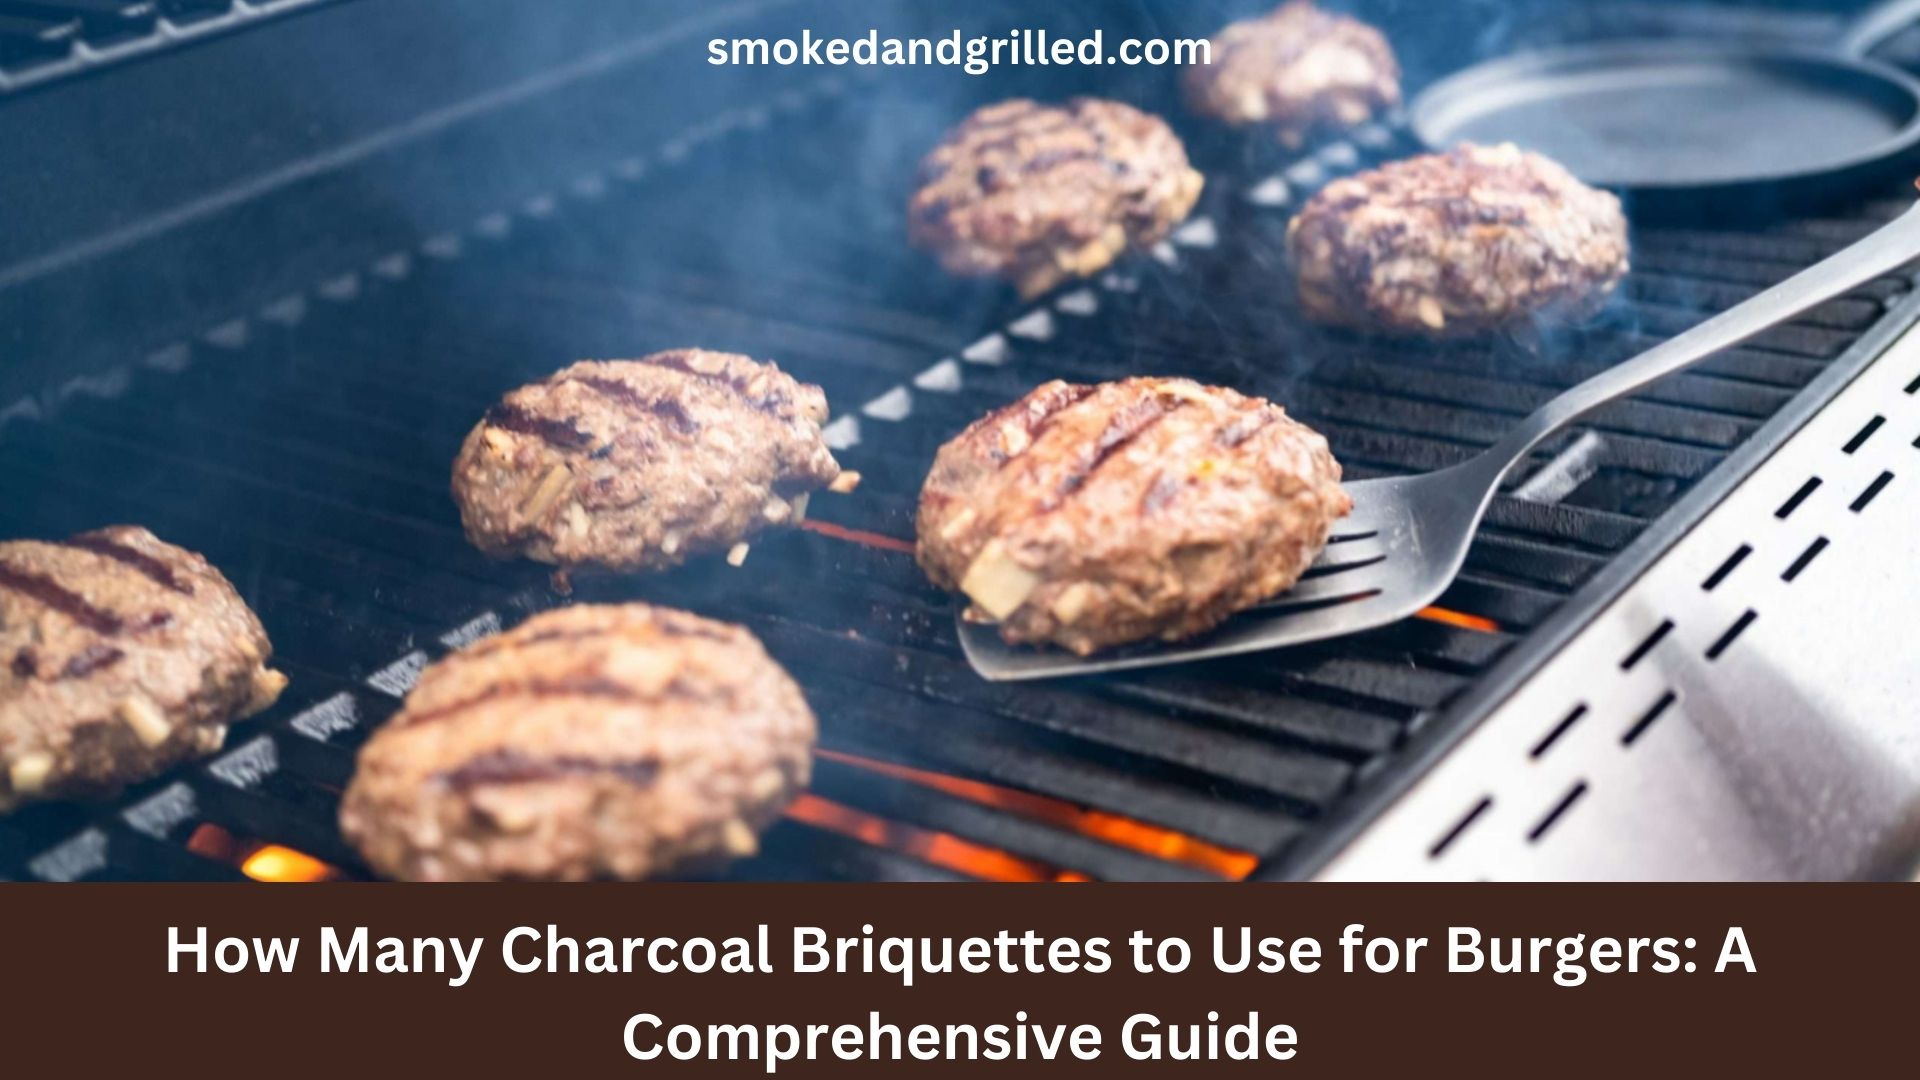 How Many Charcoal Briquettes to Use for Burgers: A Comprehensive Guide